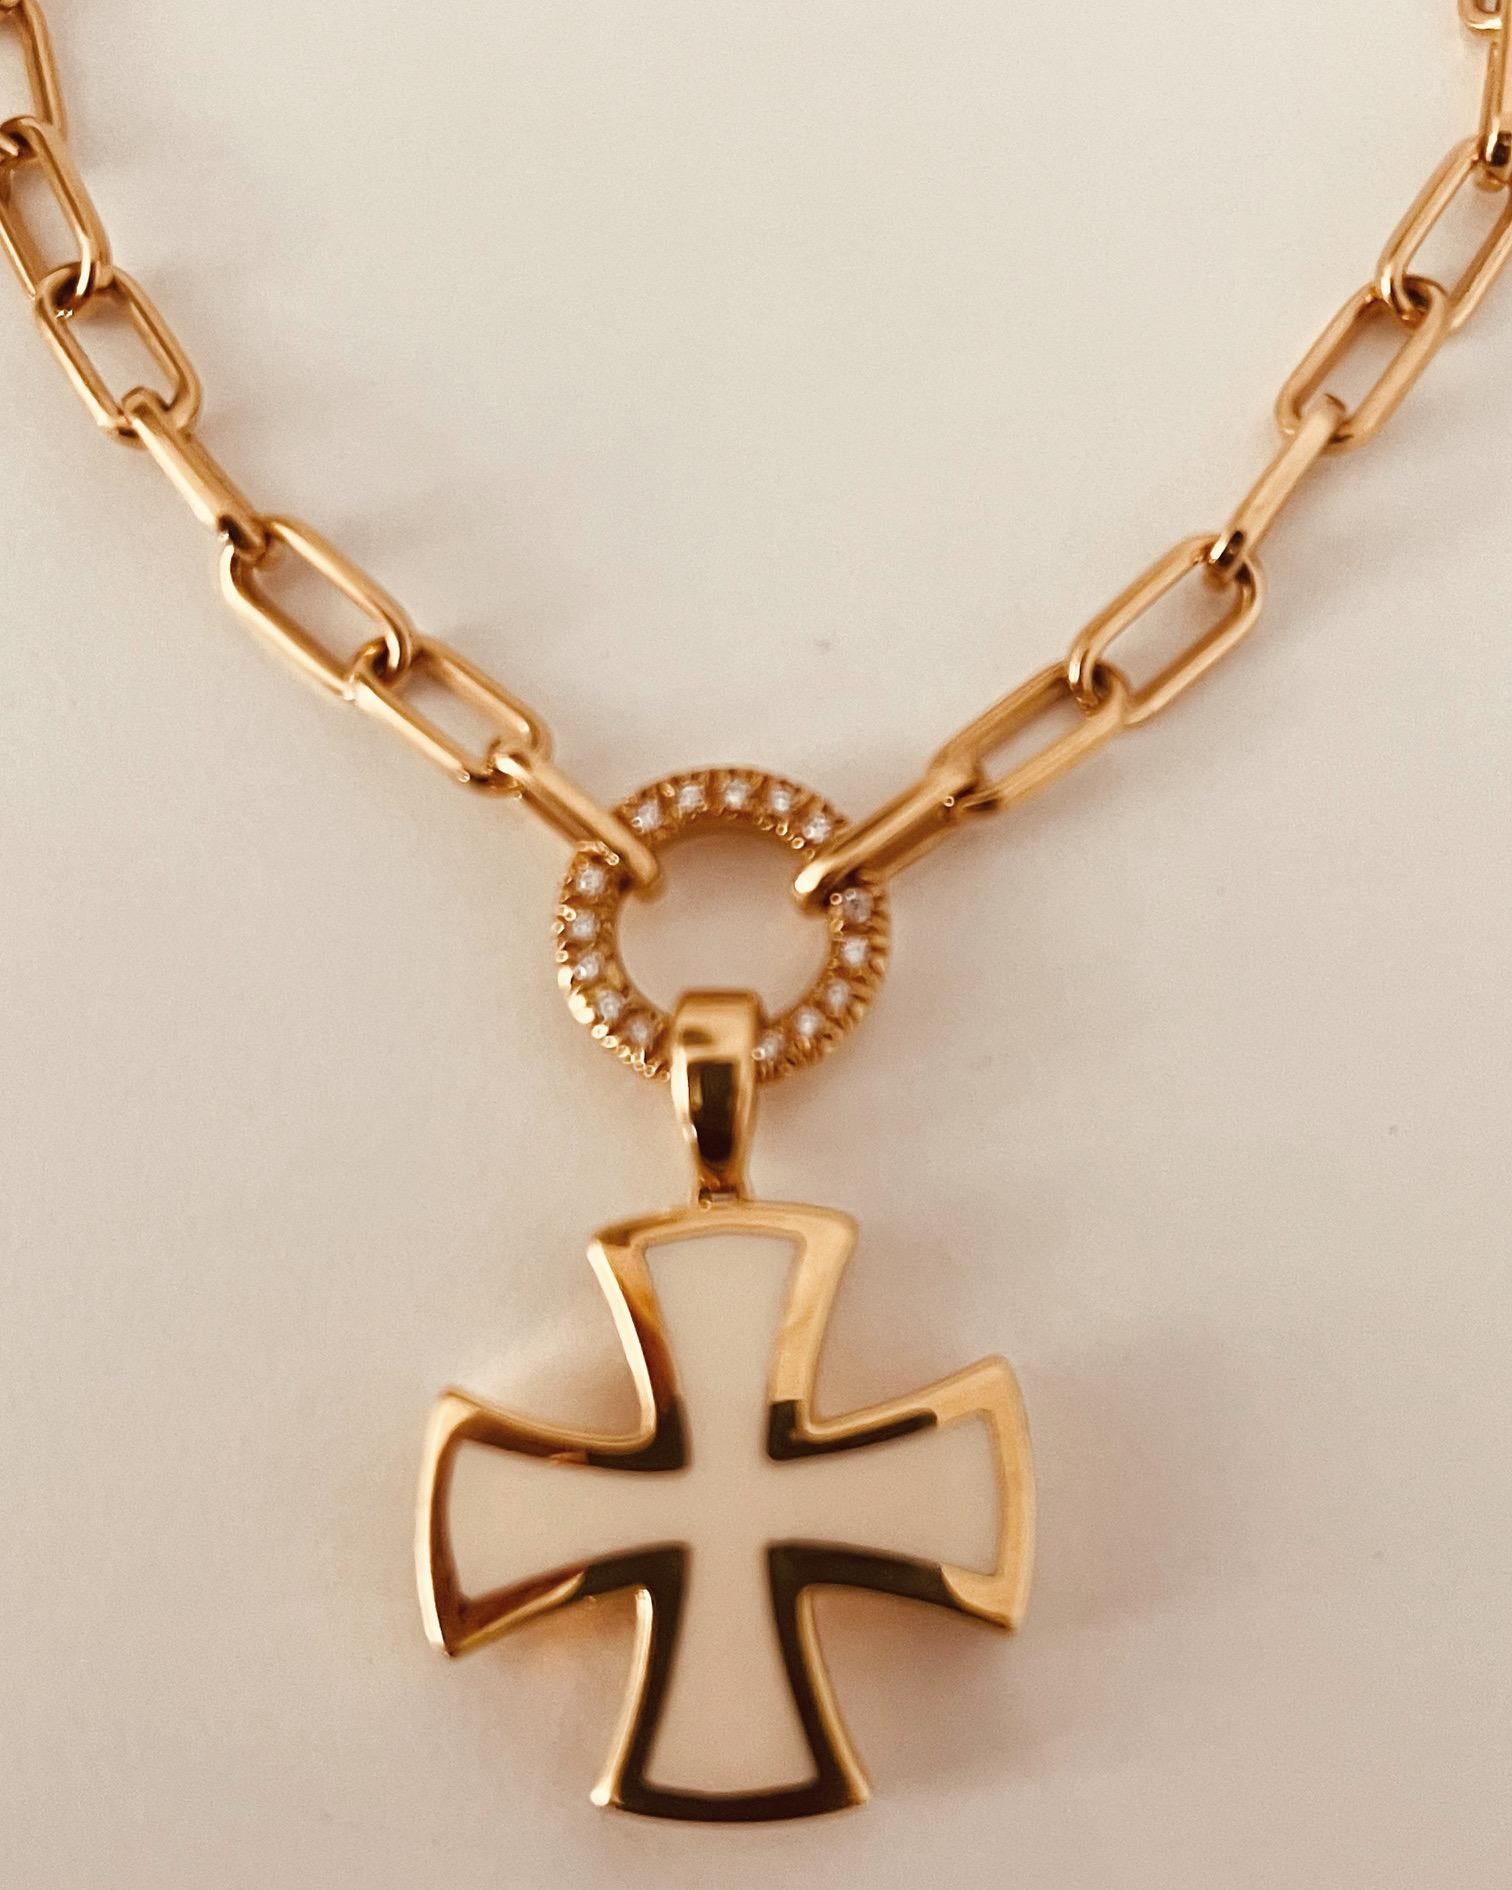 18 Carat Gold Chain Connected To A Diamond Suspended Ring & Enamel Cross Pendant For Sale 2